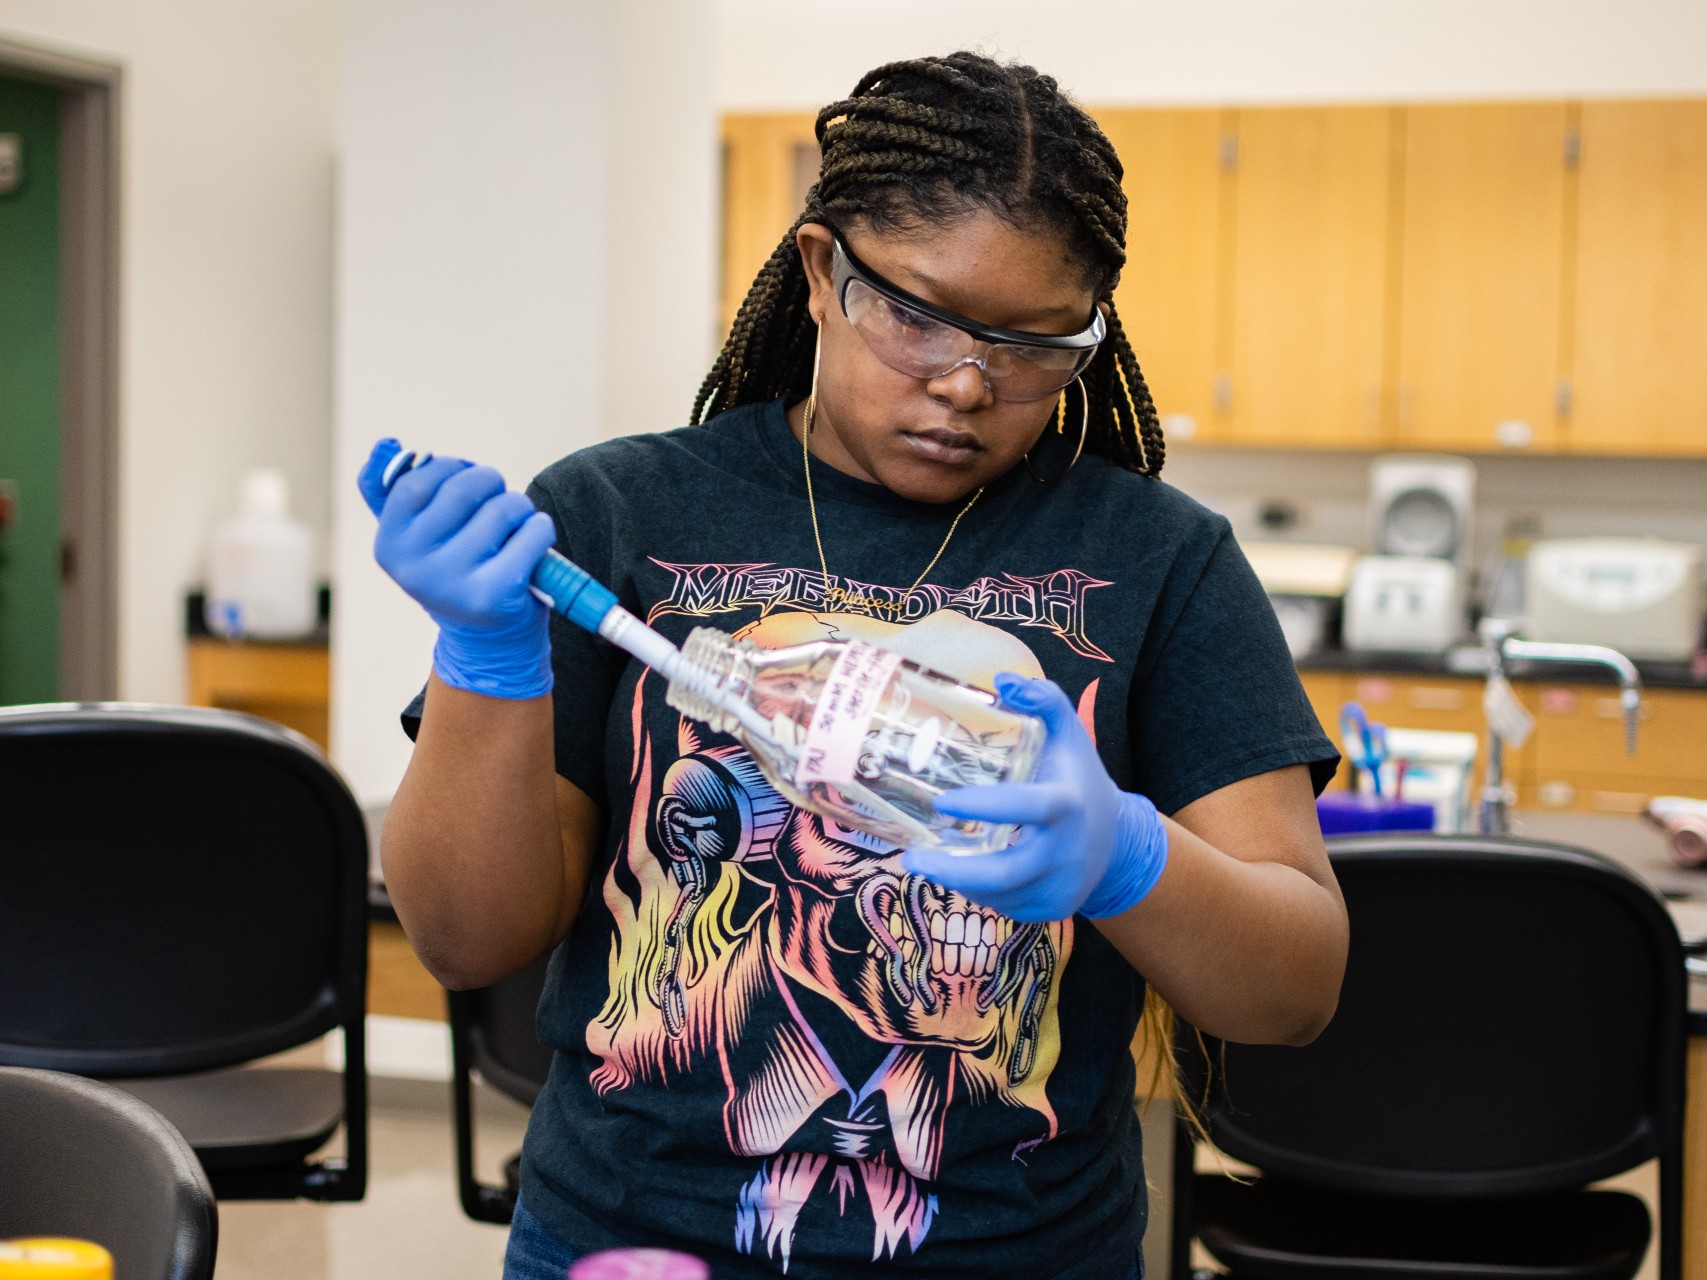 A student, wearing lab goggles and gloves, uses a pipette in a chemistry lab.